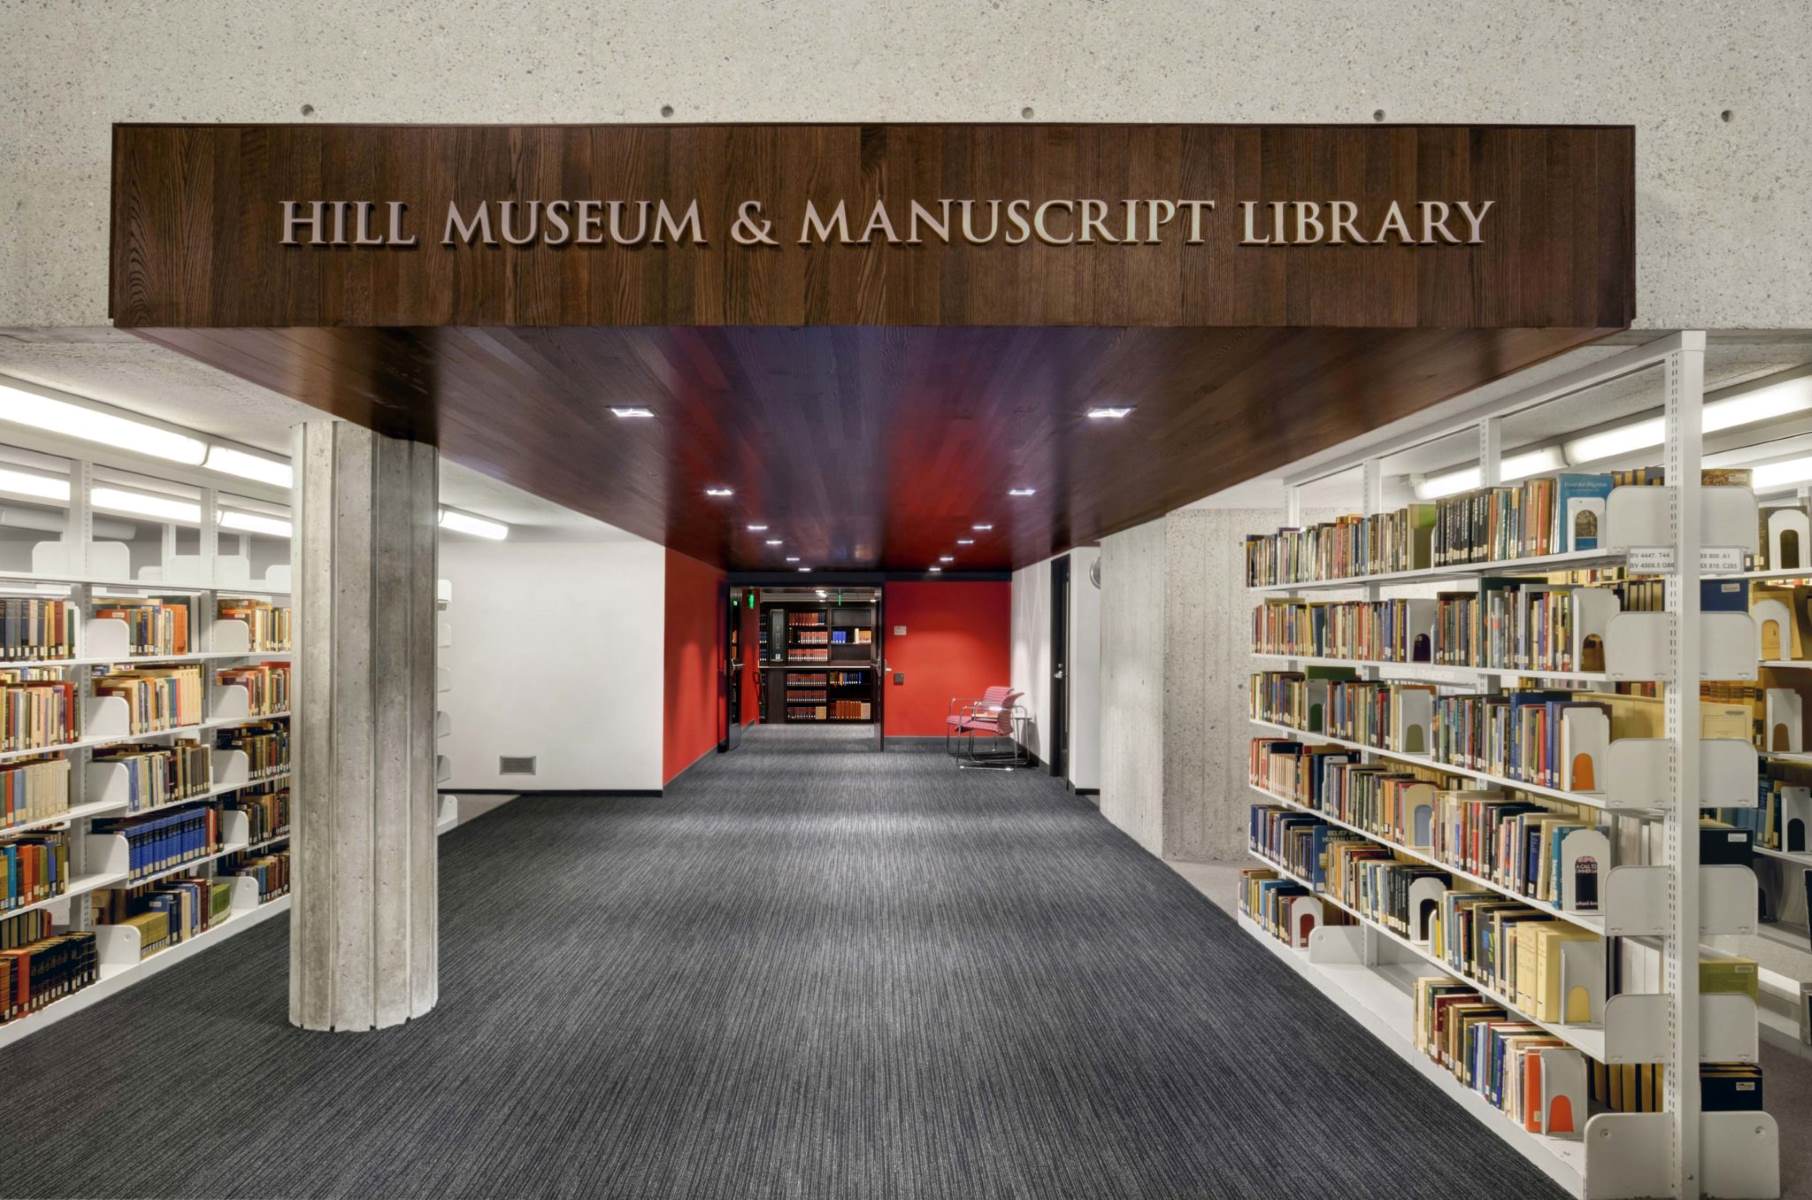 12 Fascinating Facts About Hill Museum & Manuscript Library - Facts.net